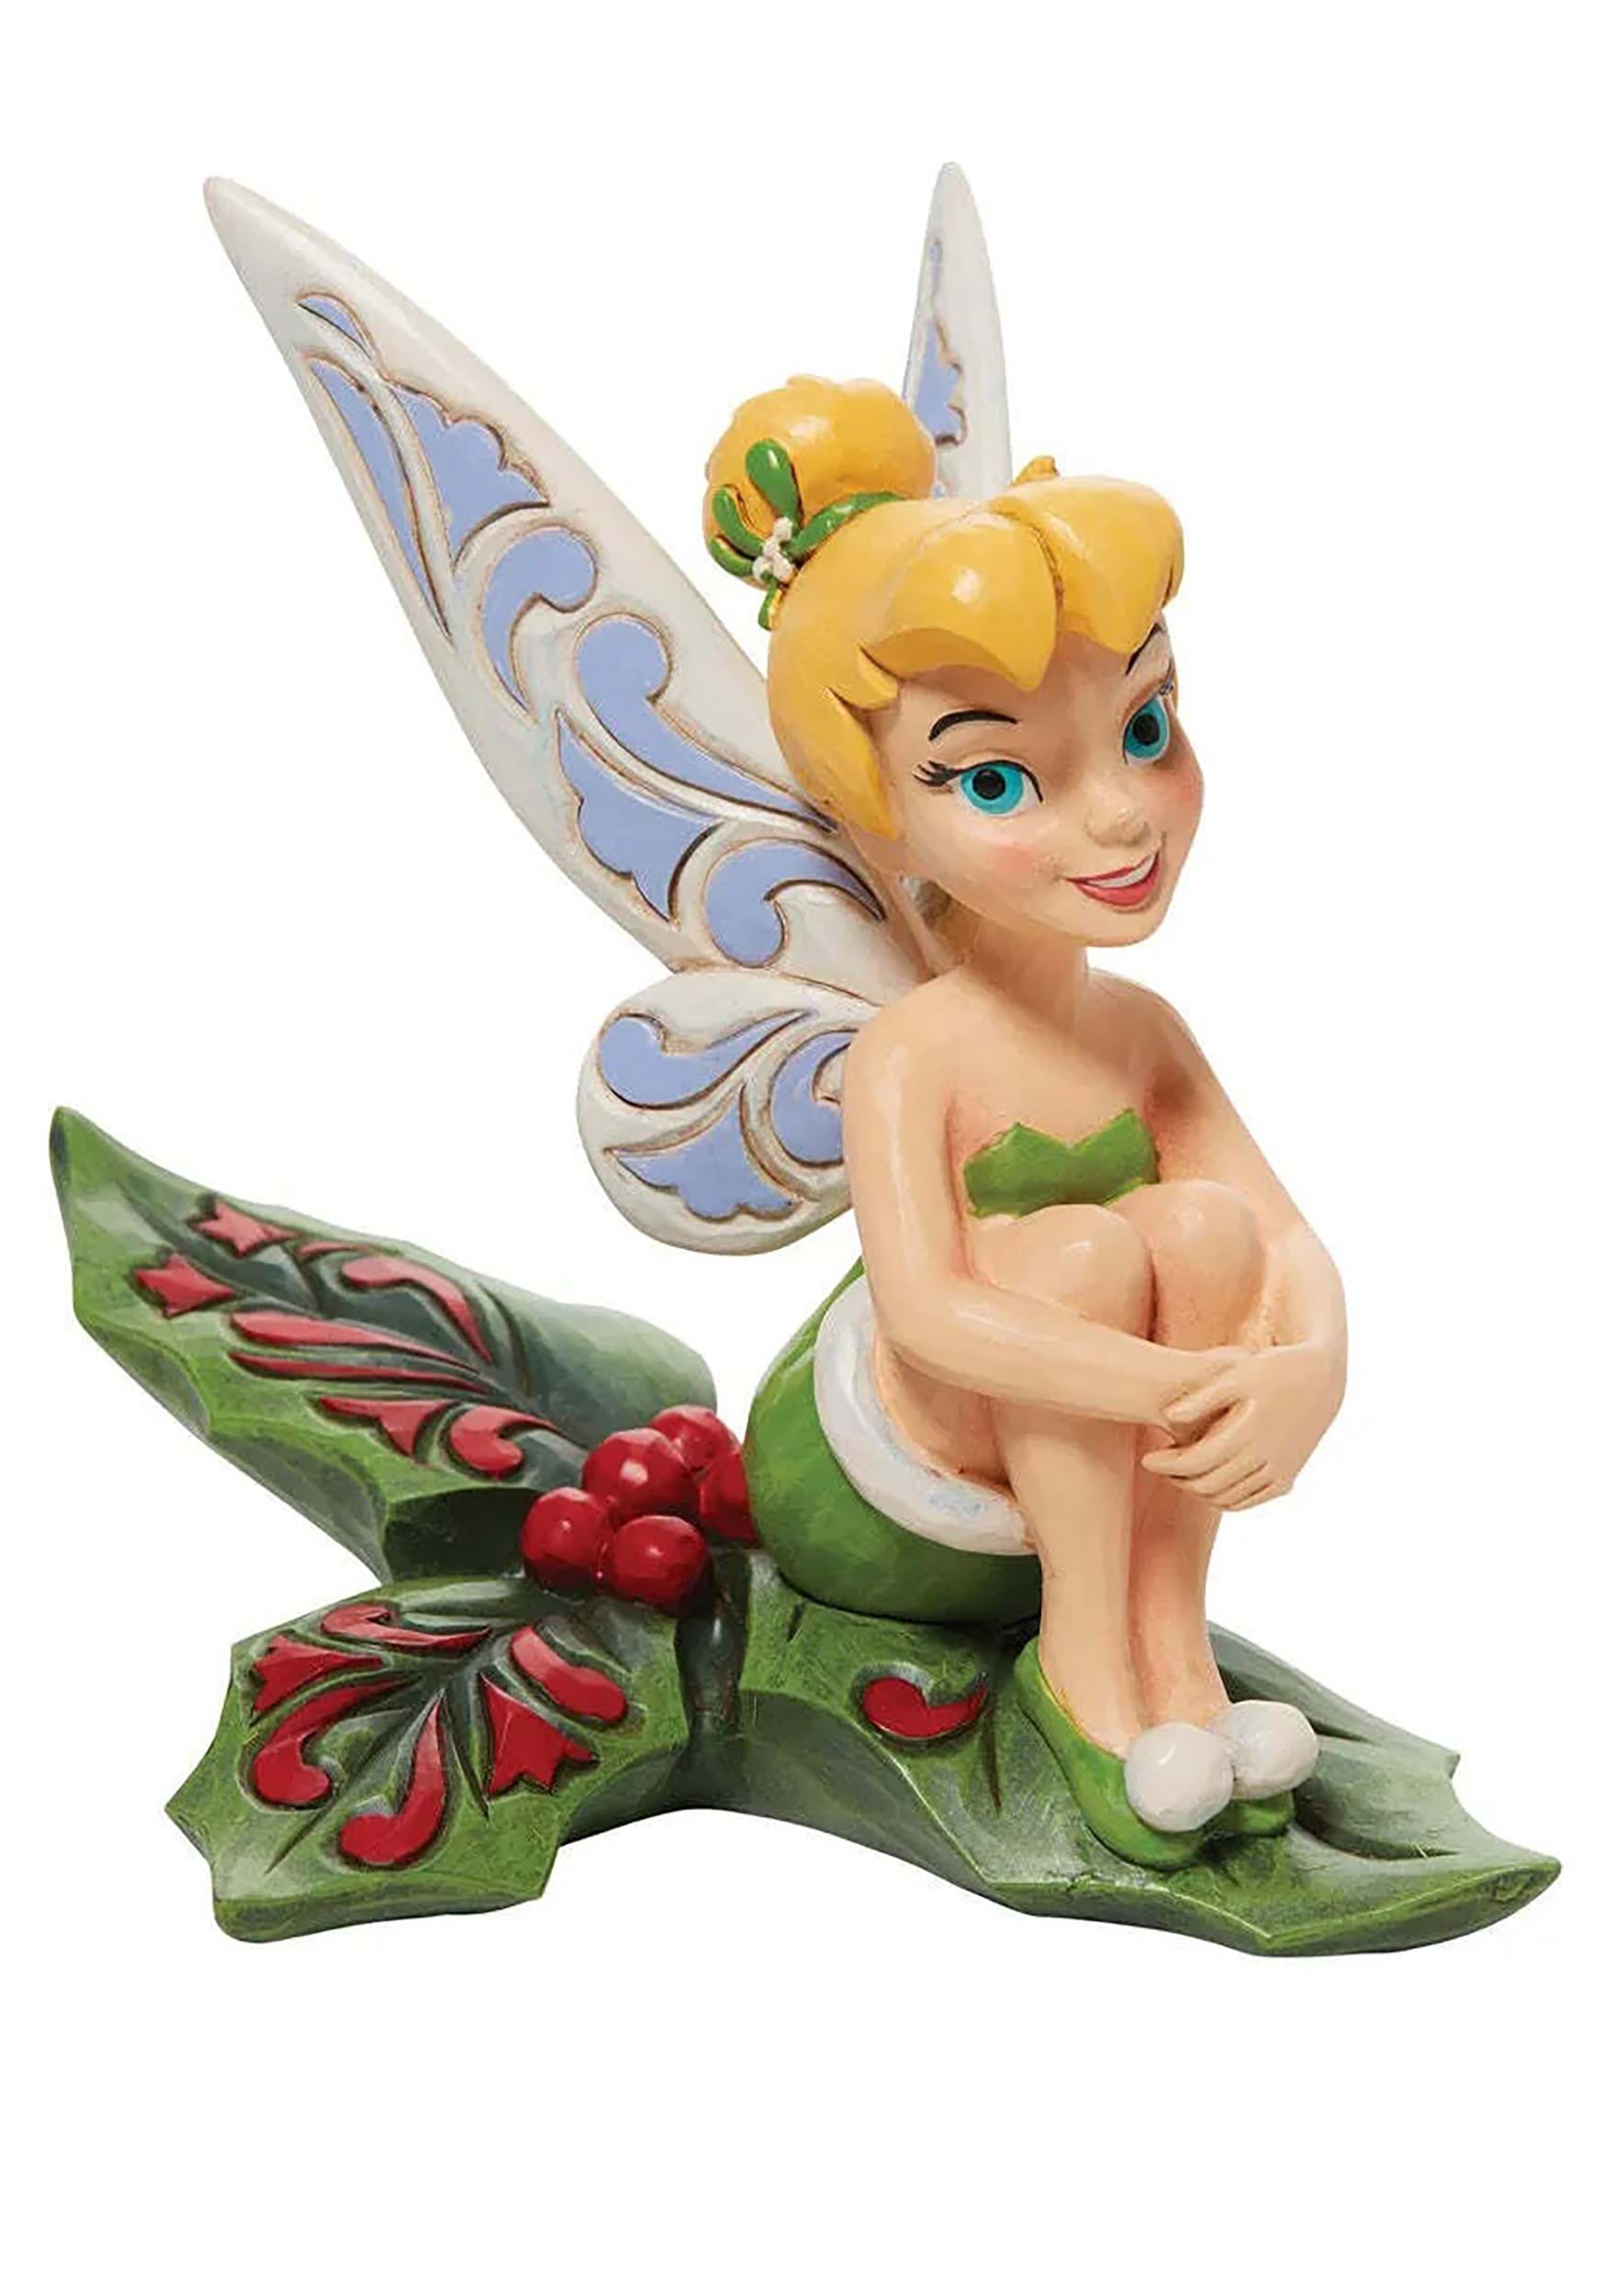 Jim Shore Tinker Bell Sitting on Holly Figure